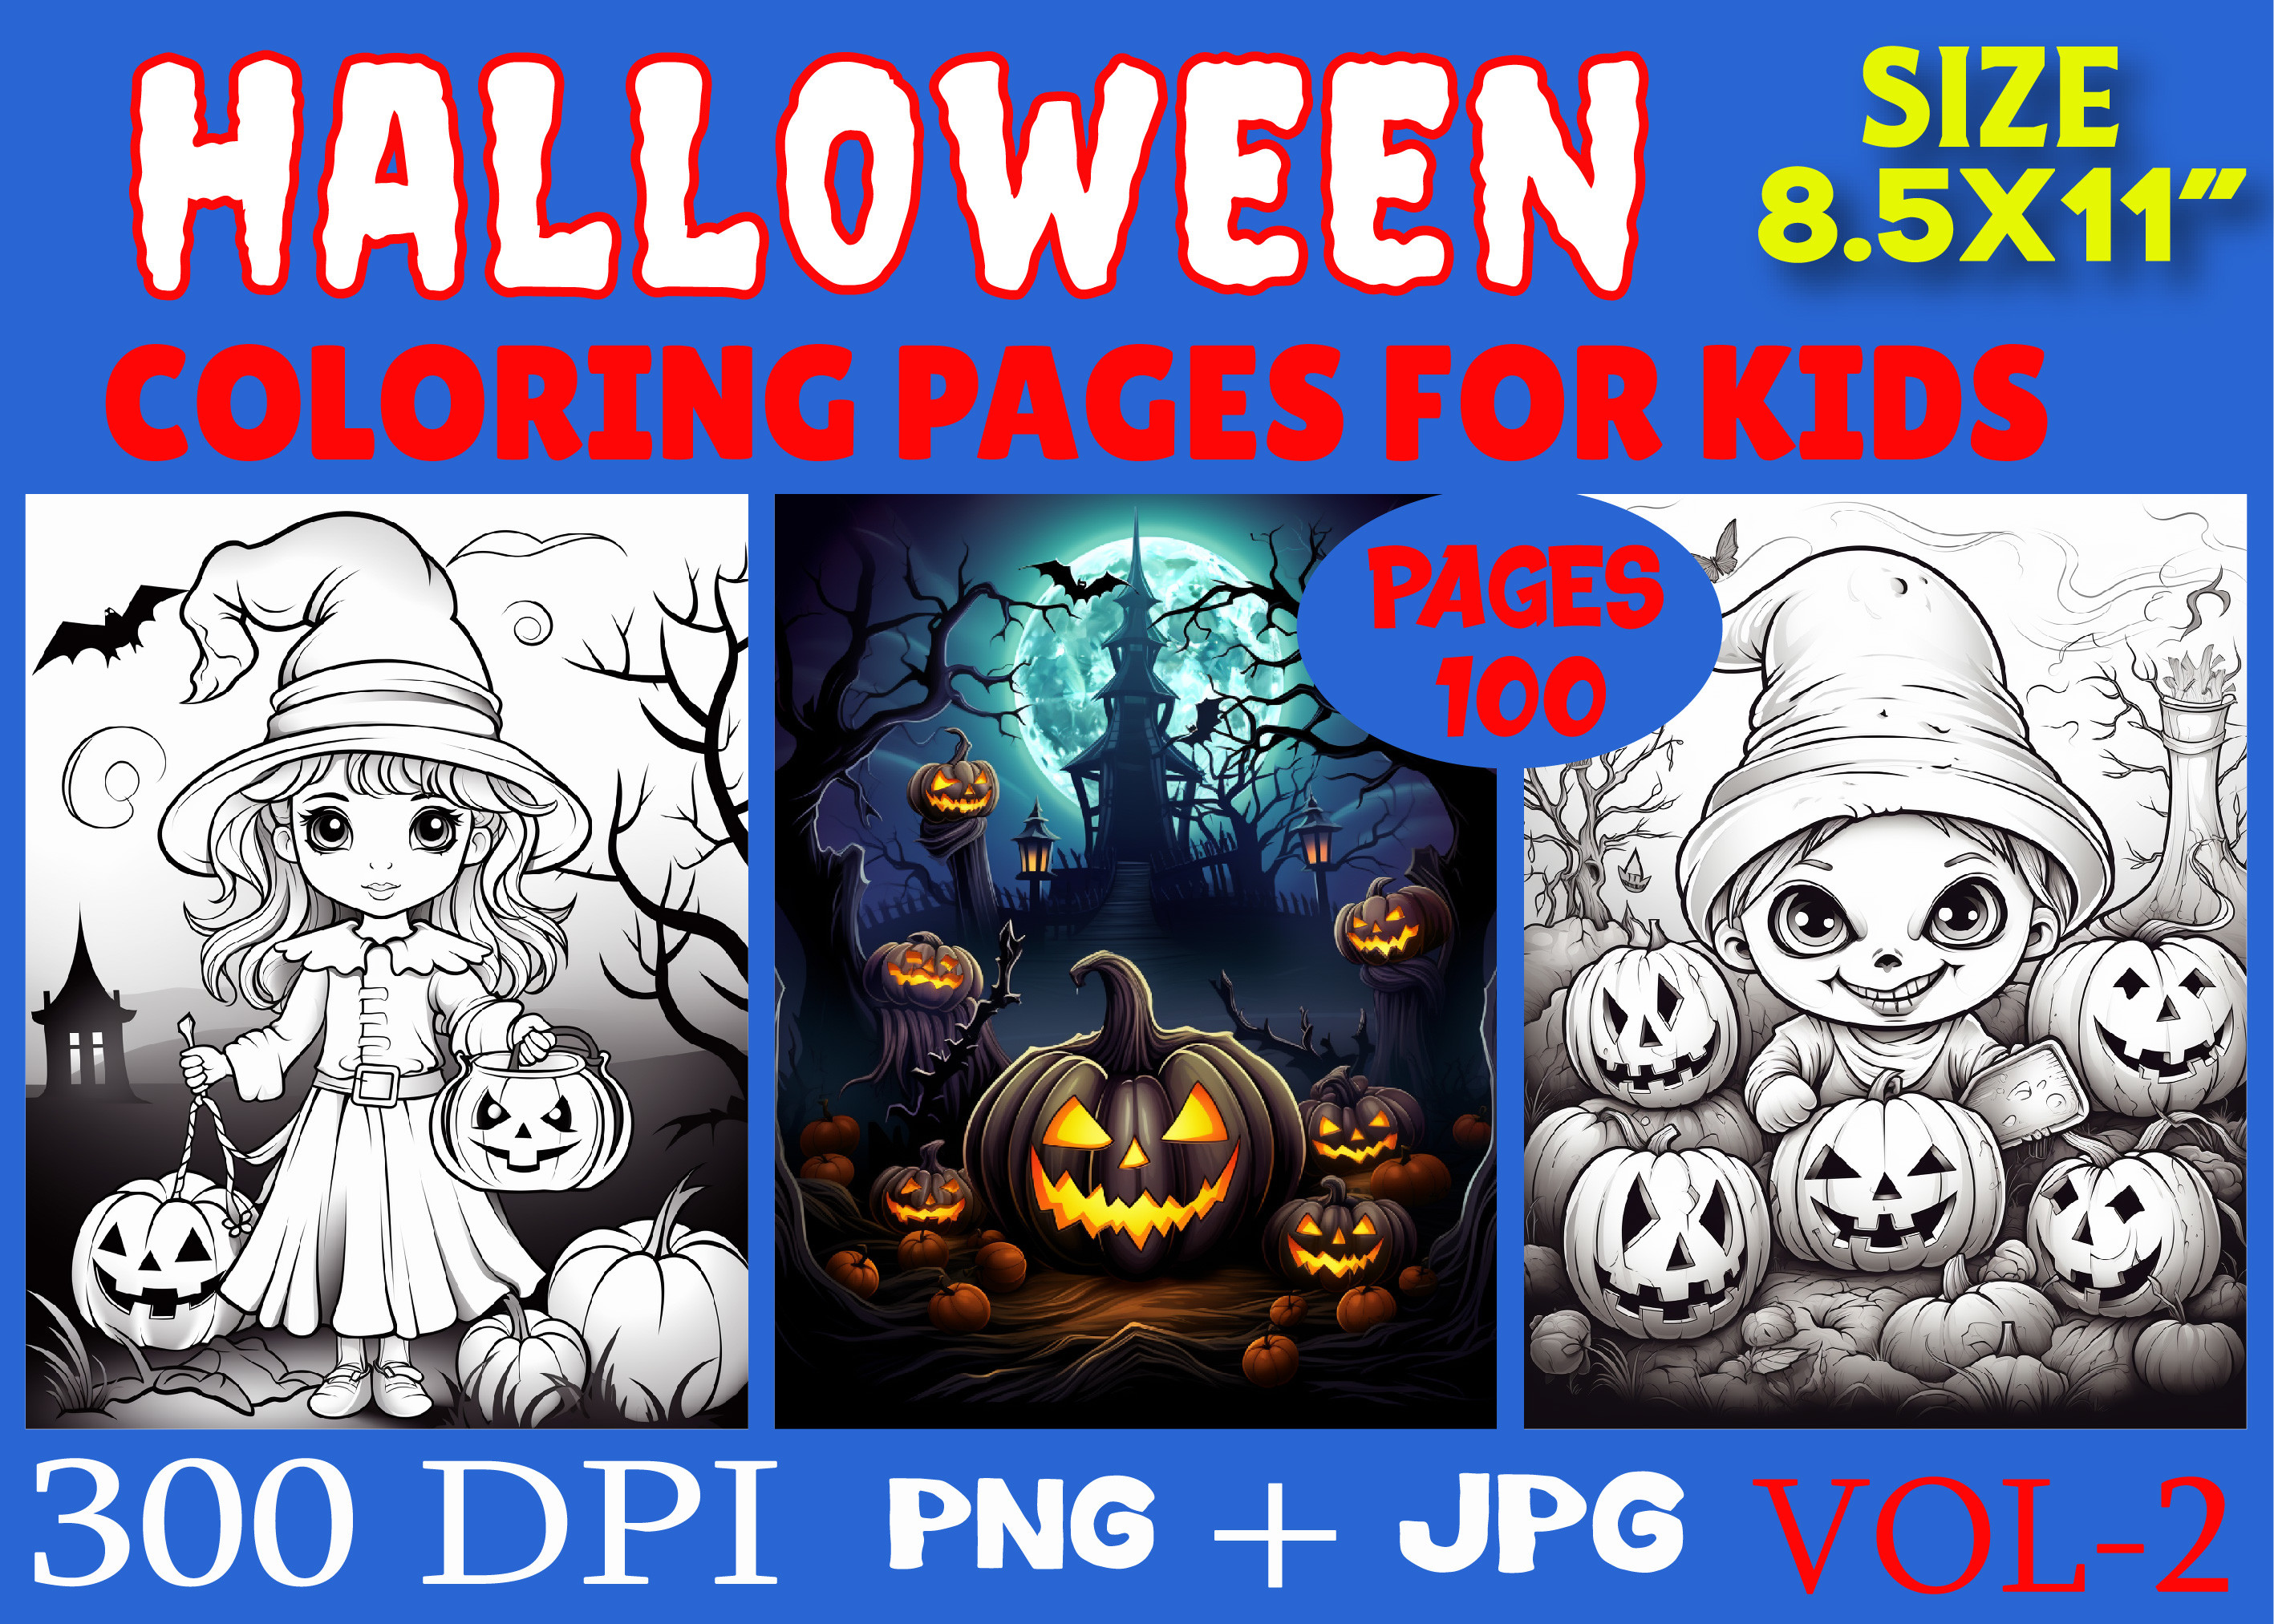 100-halloween-coloring-pages-for-kids-graphic-by-art-zone-creative-fabrica